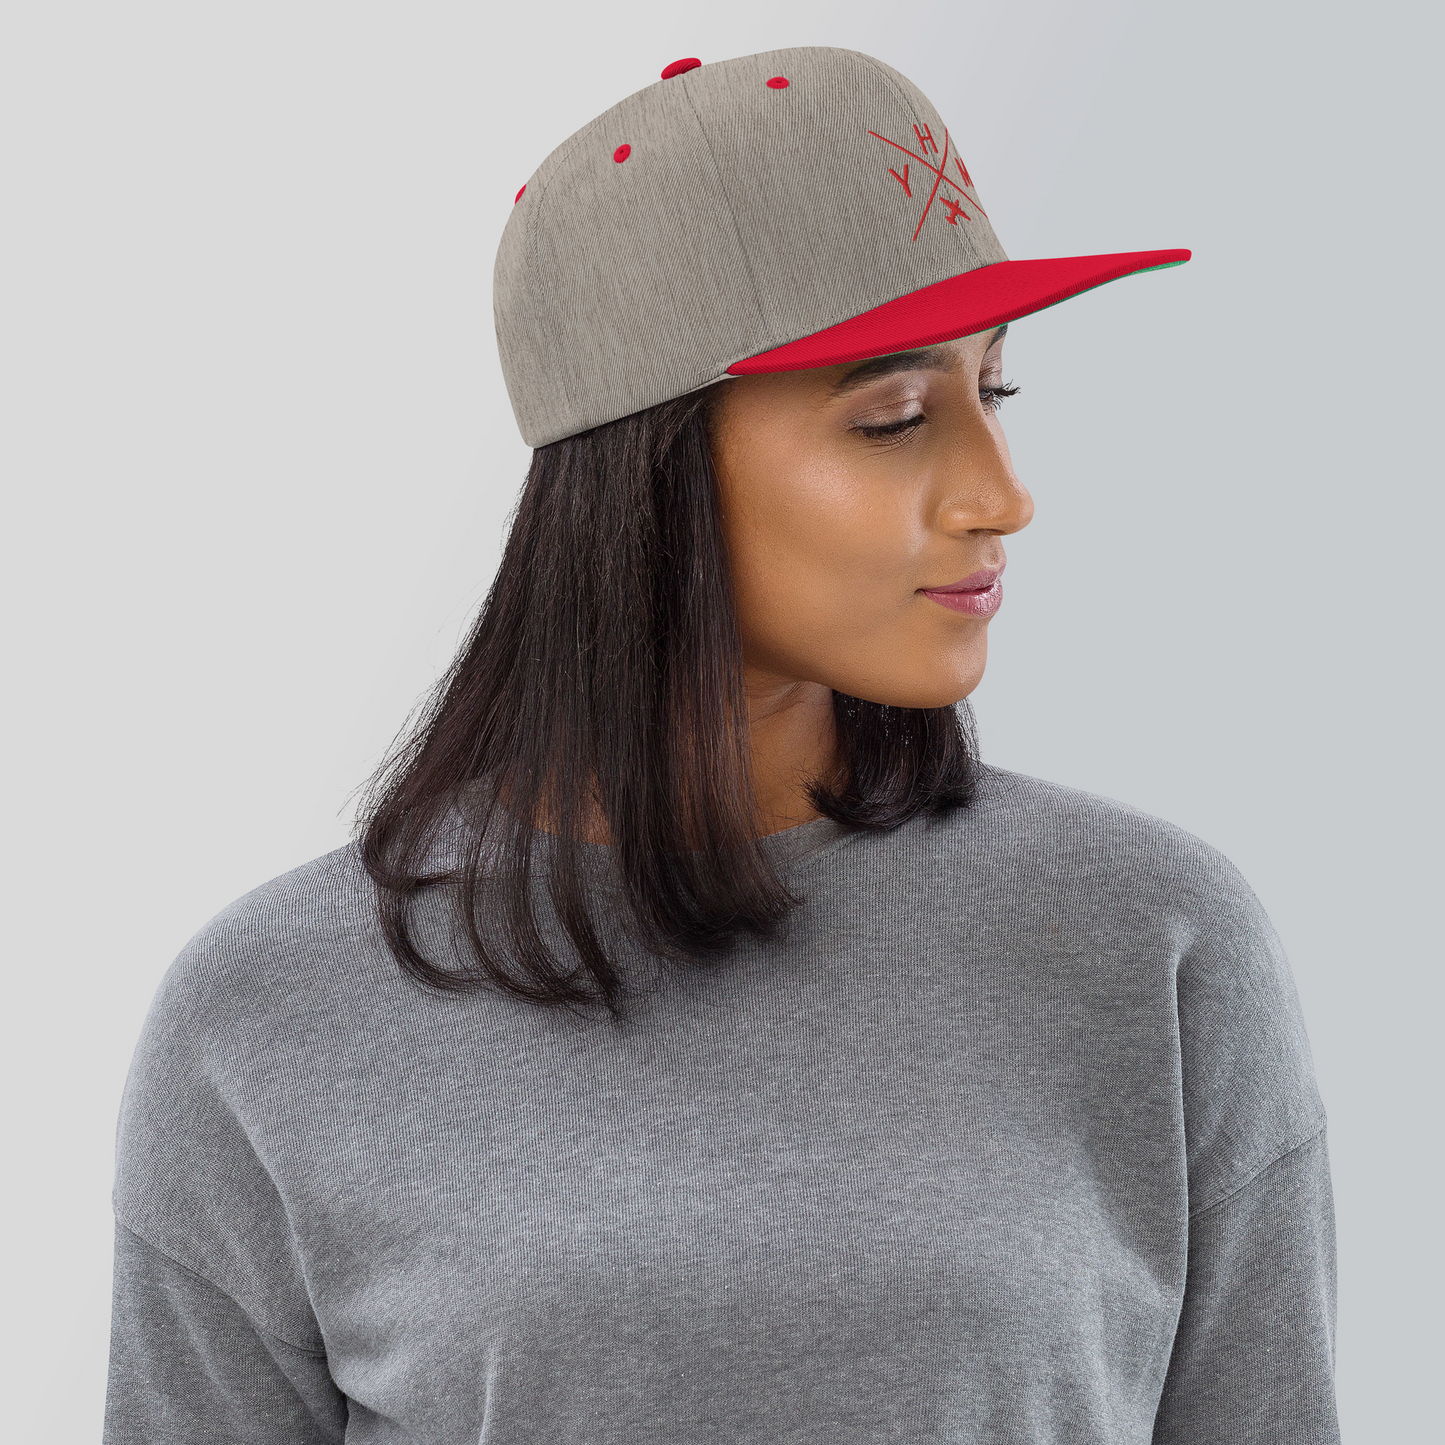 Crossed-X Snapback Hat • Red Embroidery